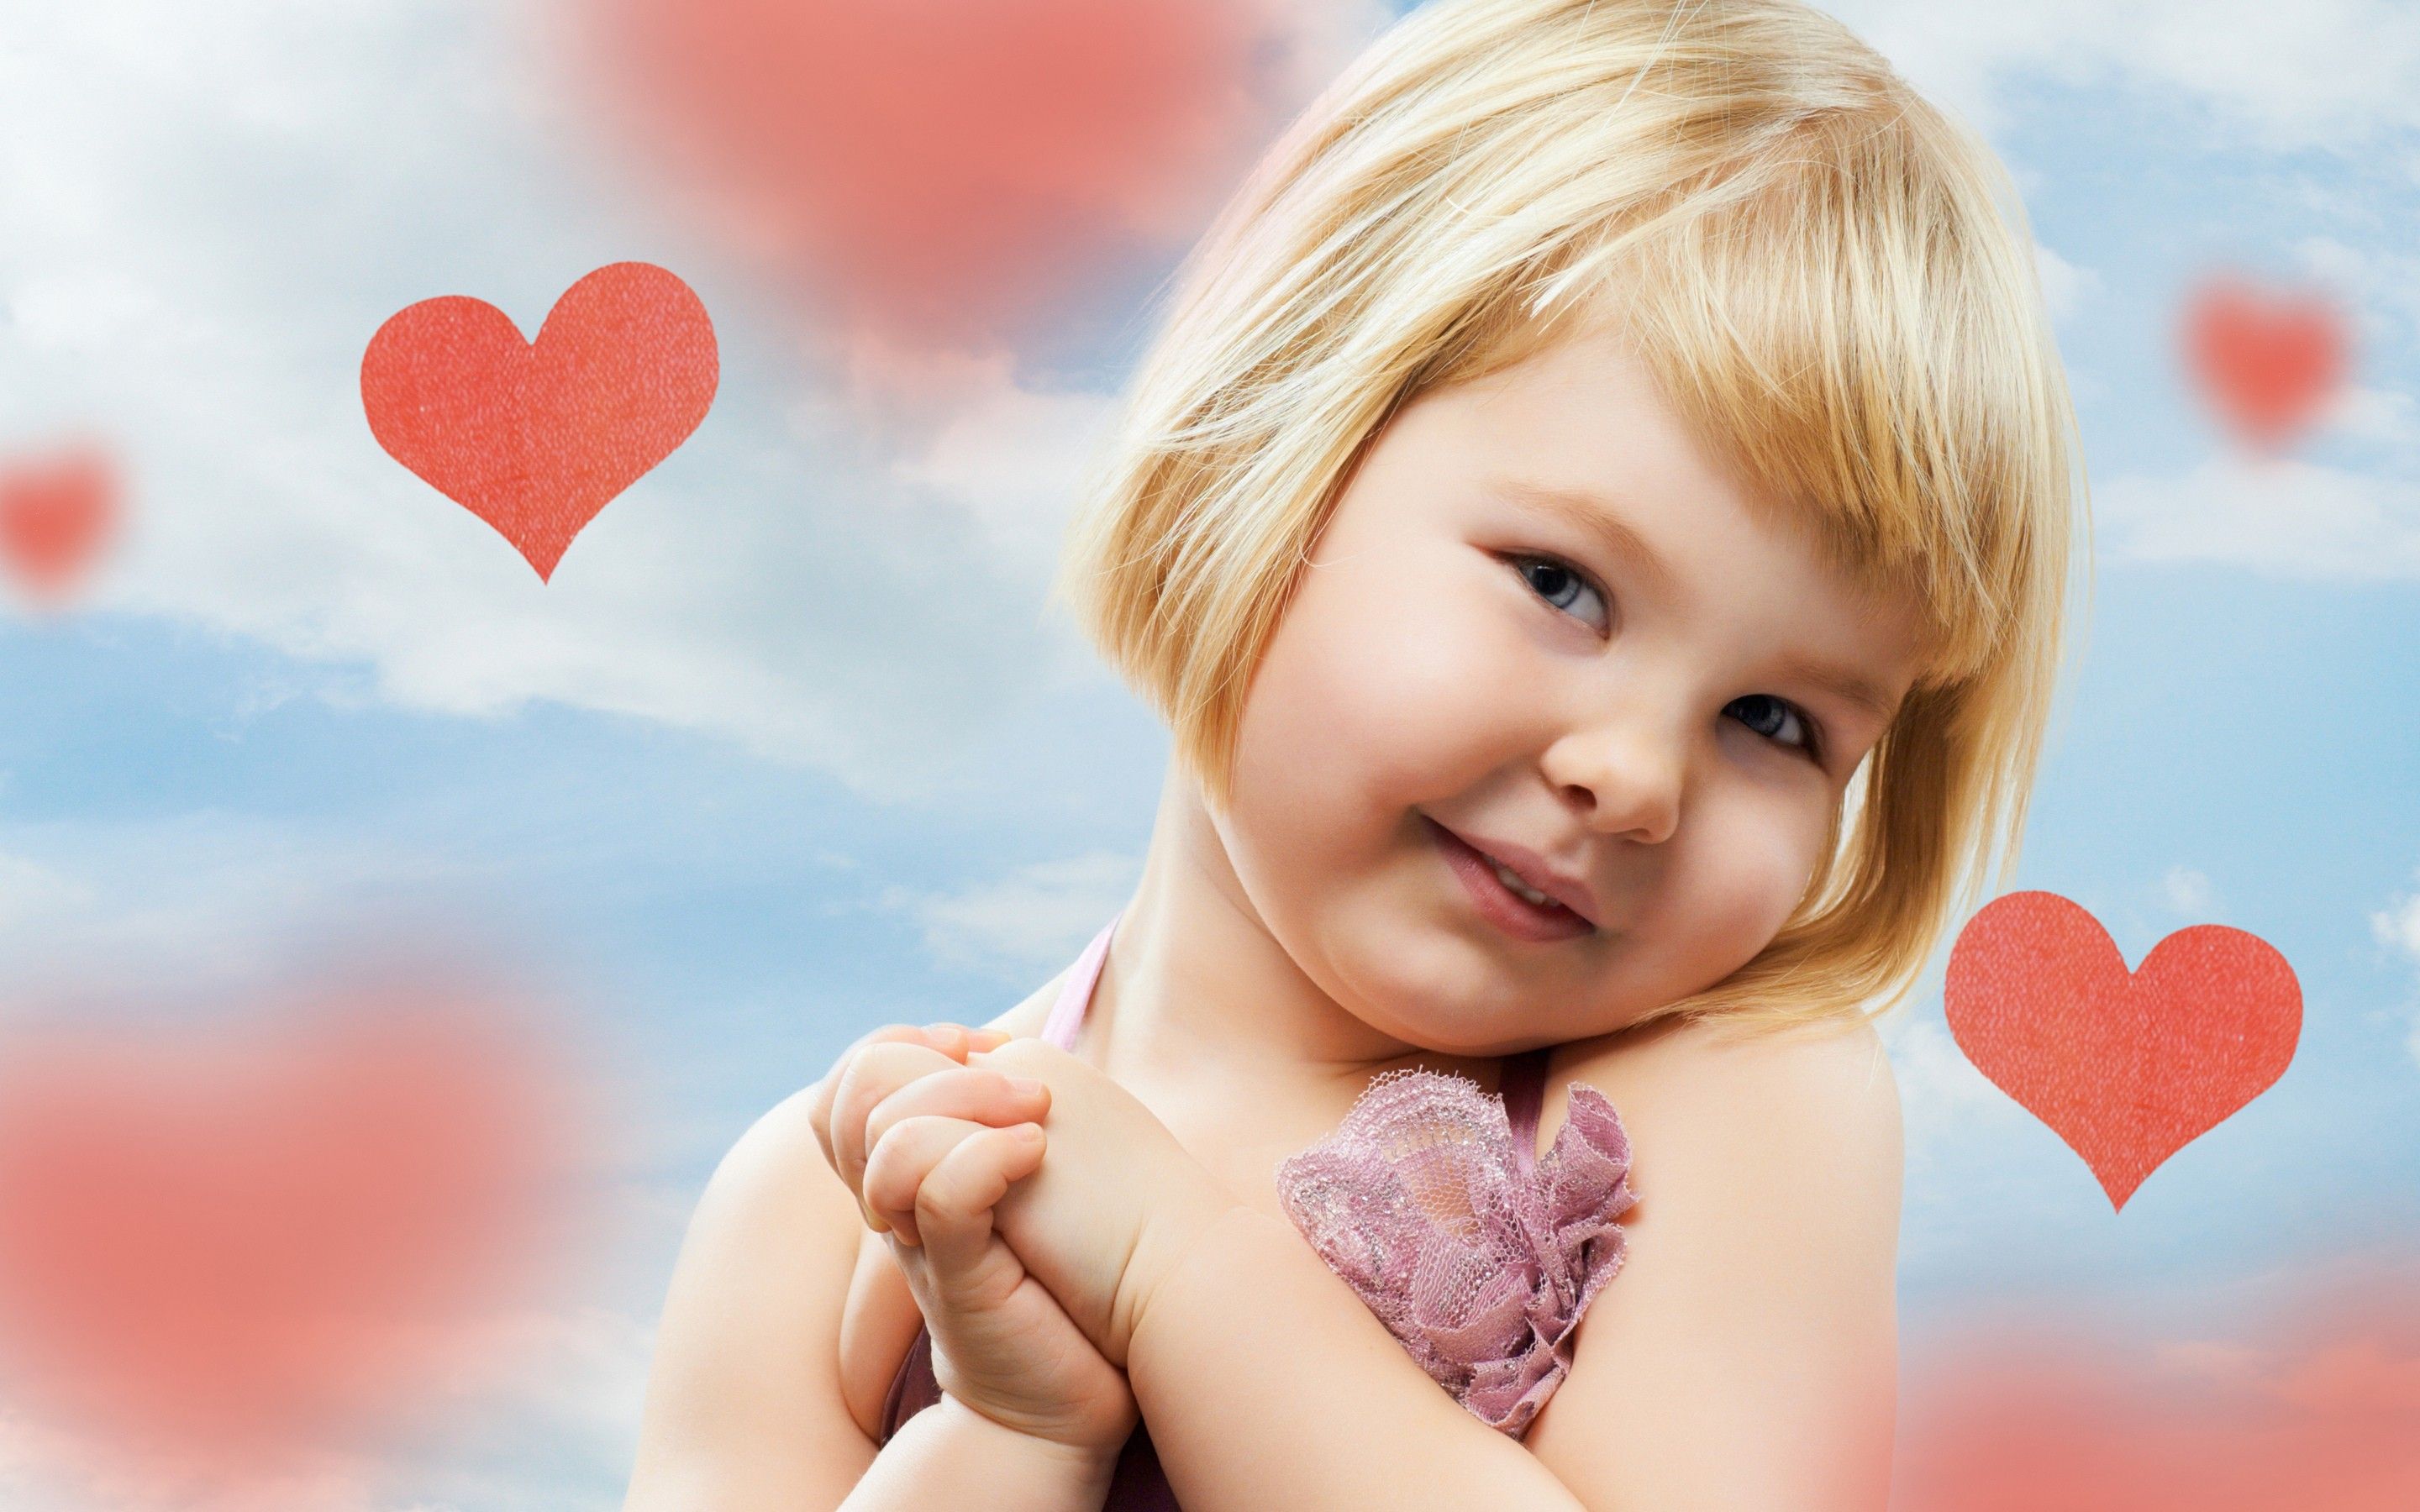 Beautiful baby girl hd posters Free wallpapers